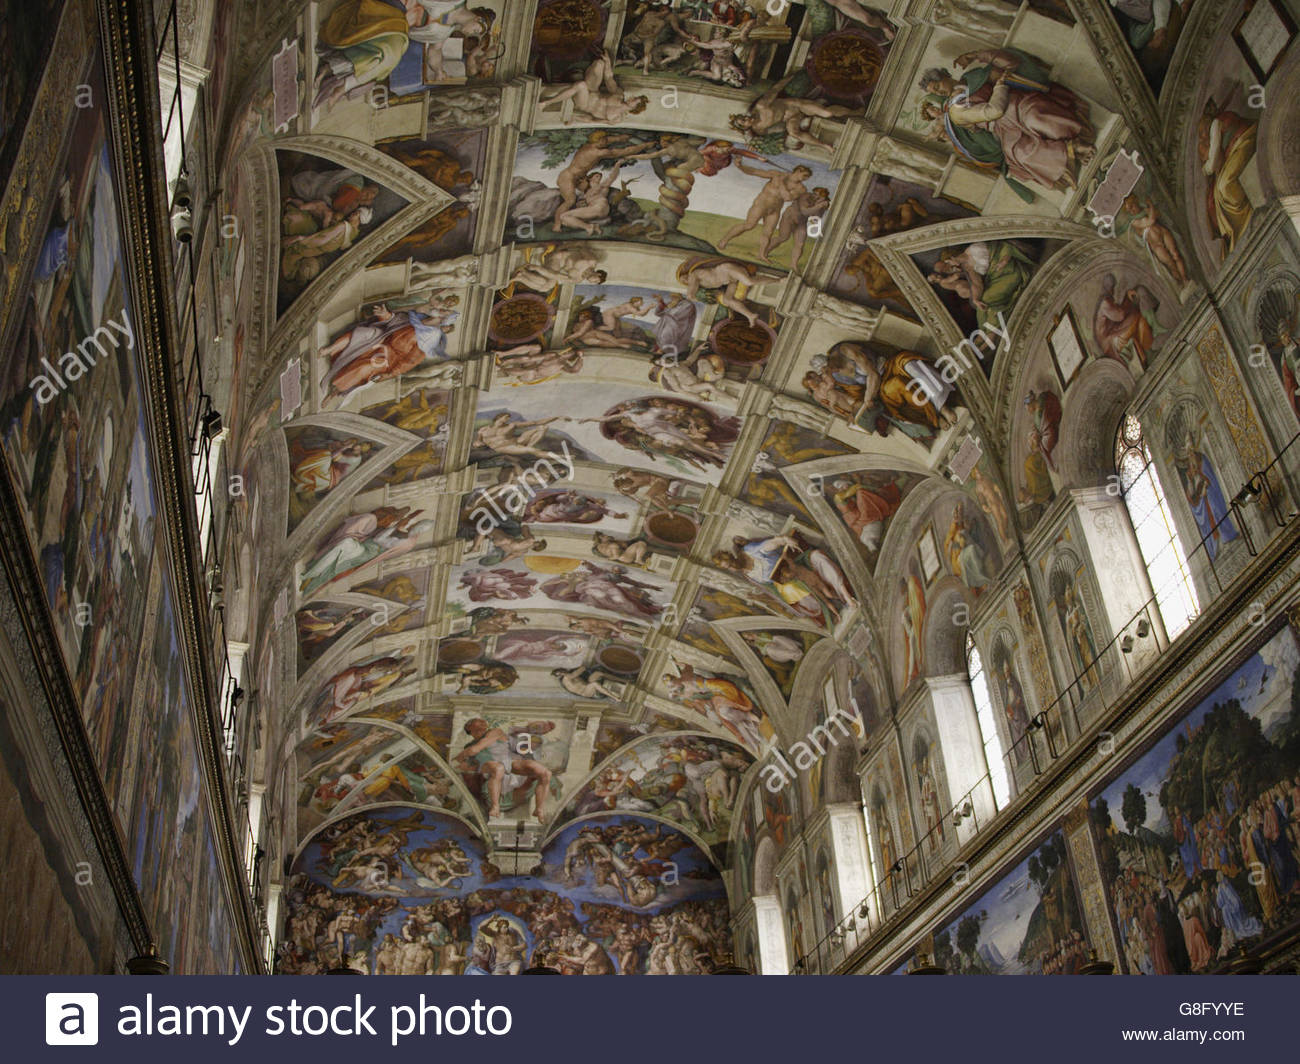 Ceiling Of The Sistine Chapel Vatican Rome Italy Stock